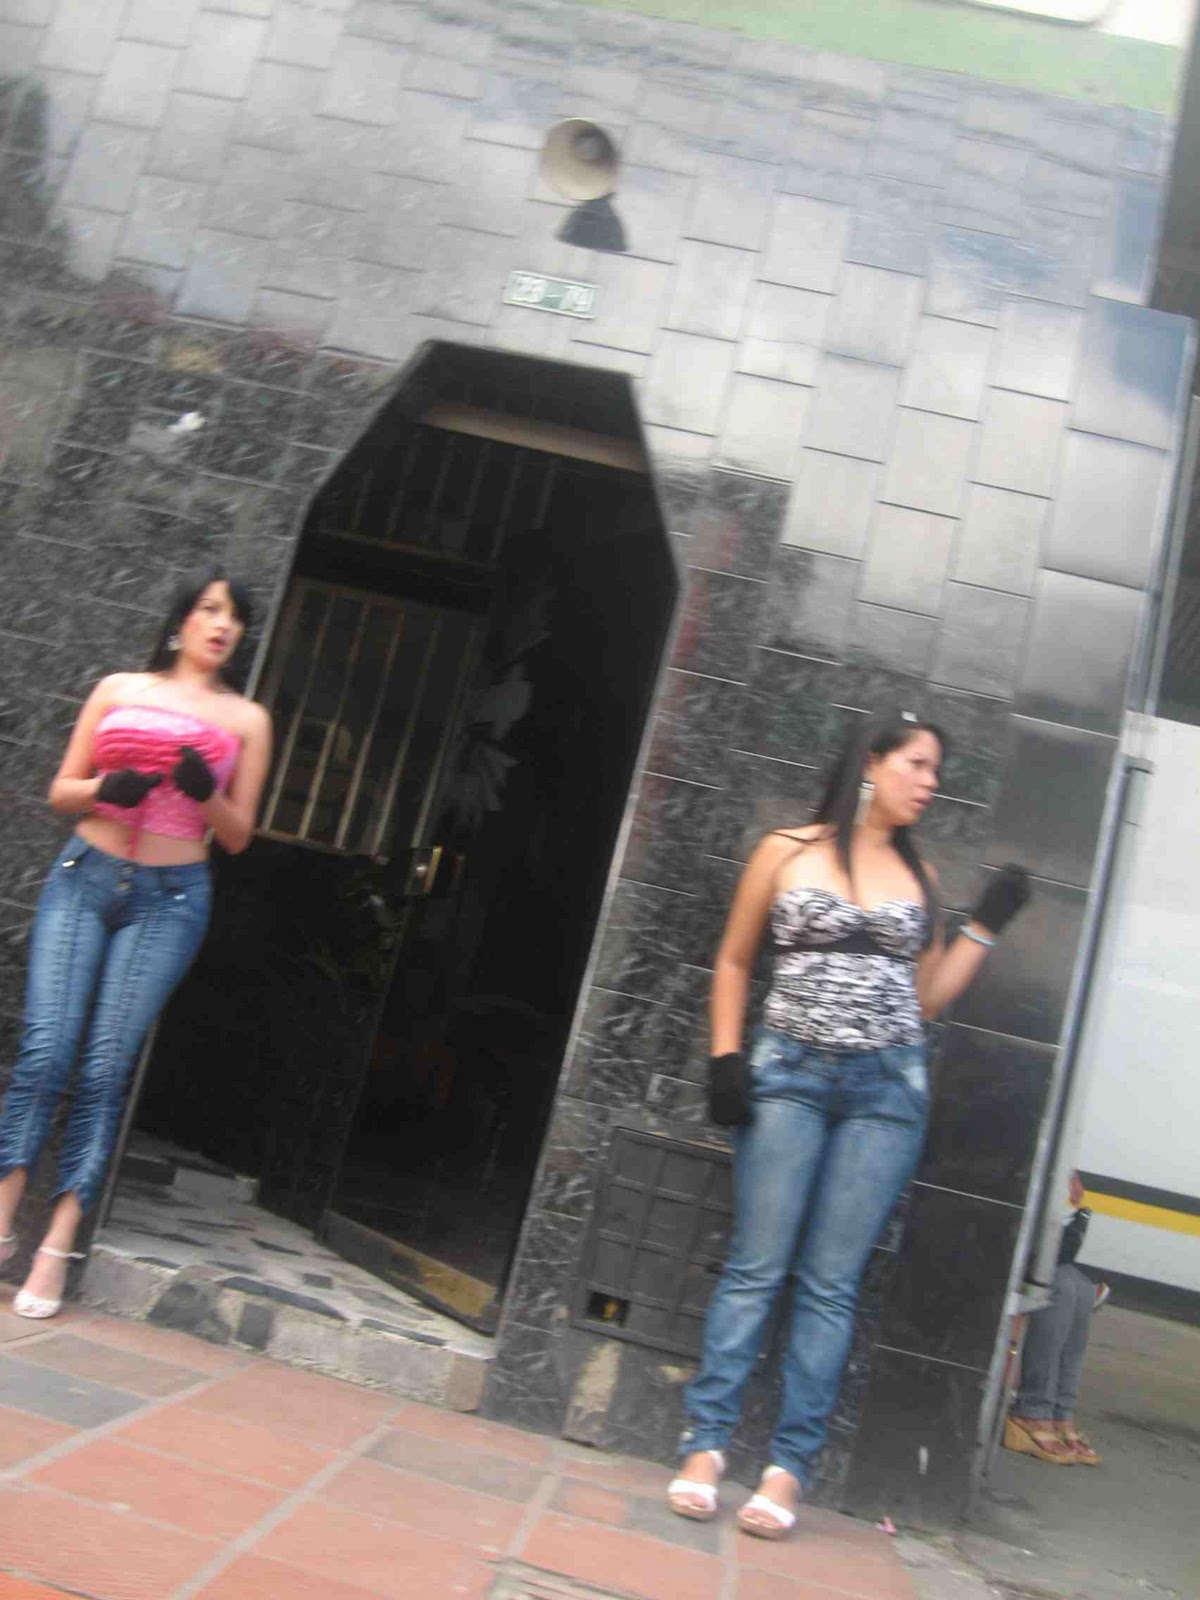 Venezuela crisis forces women to sell sex in Colombia, fuels slavery risk